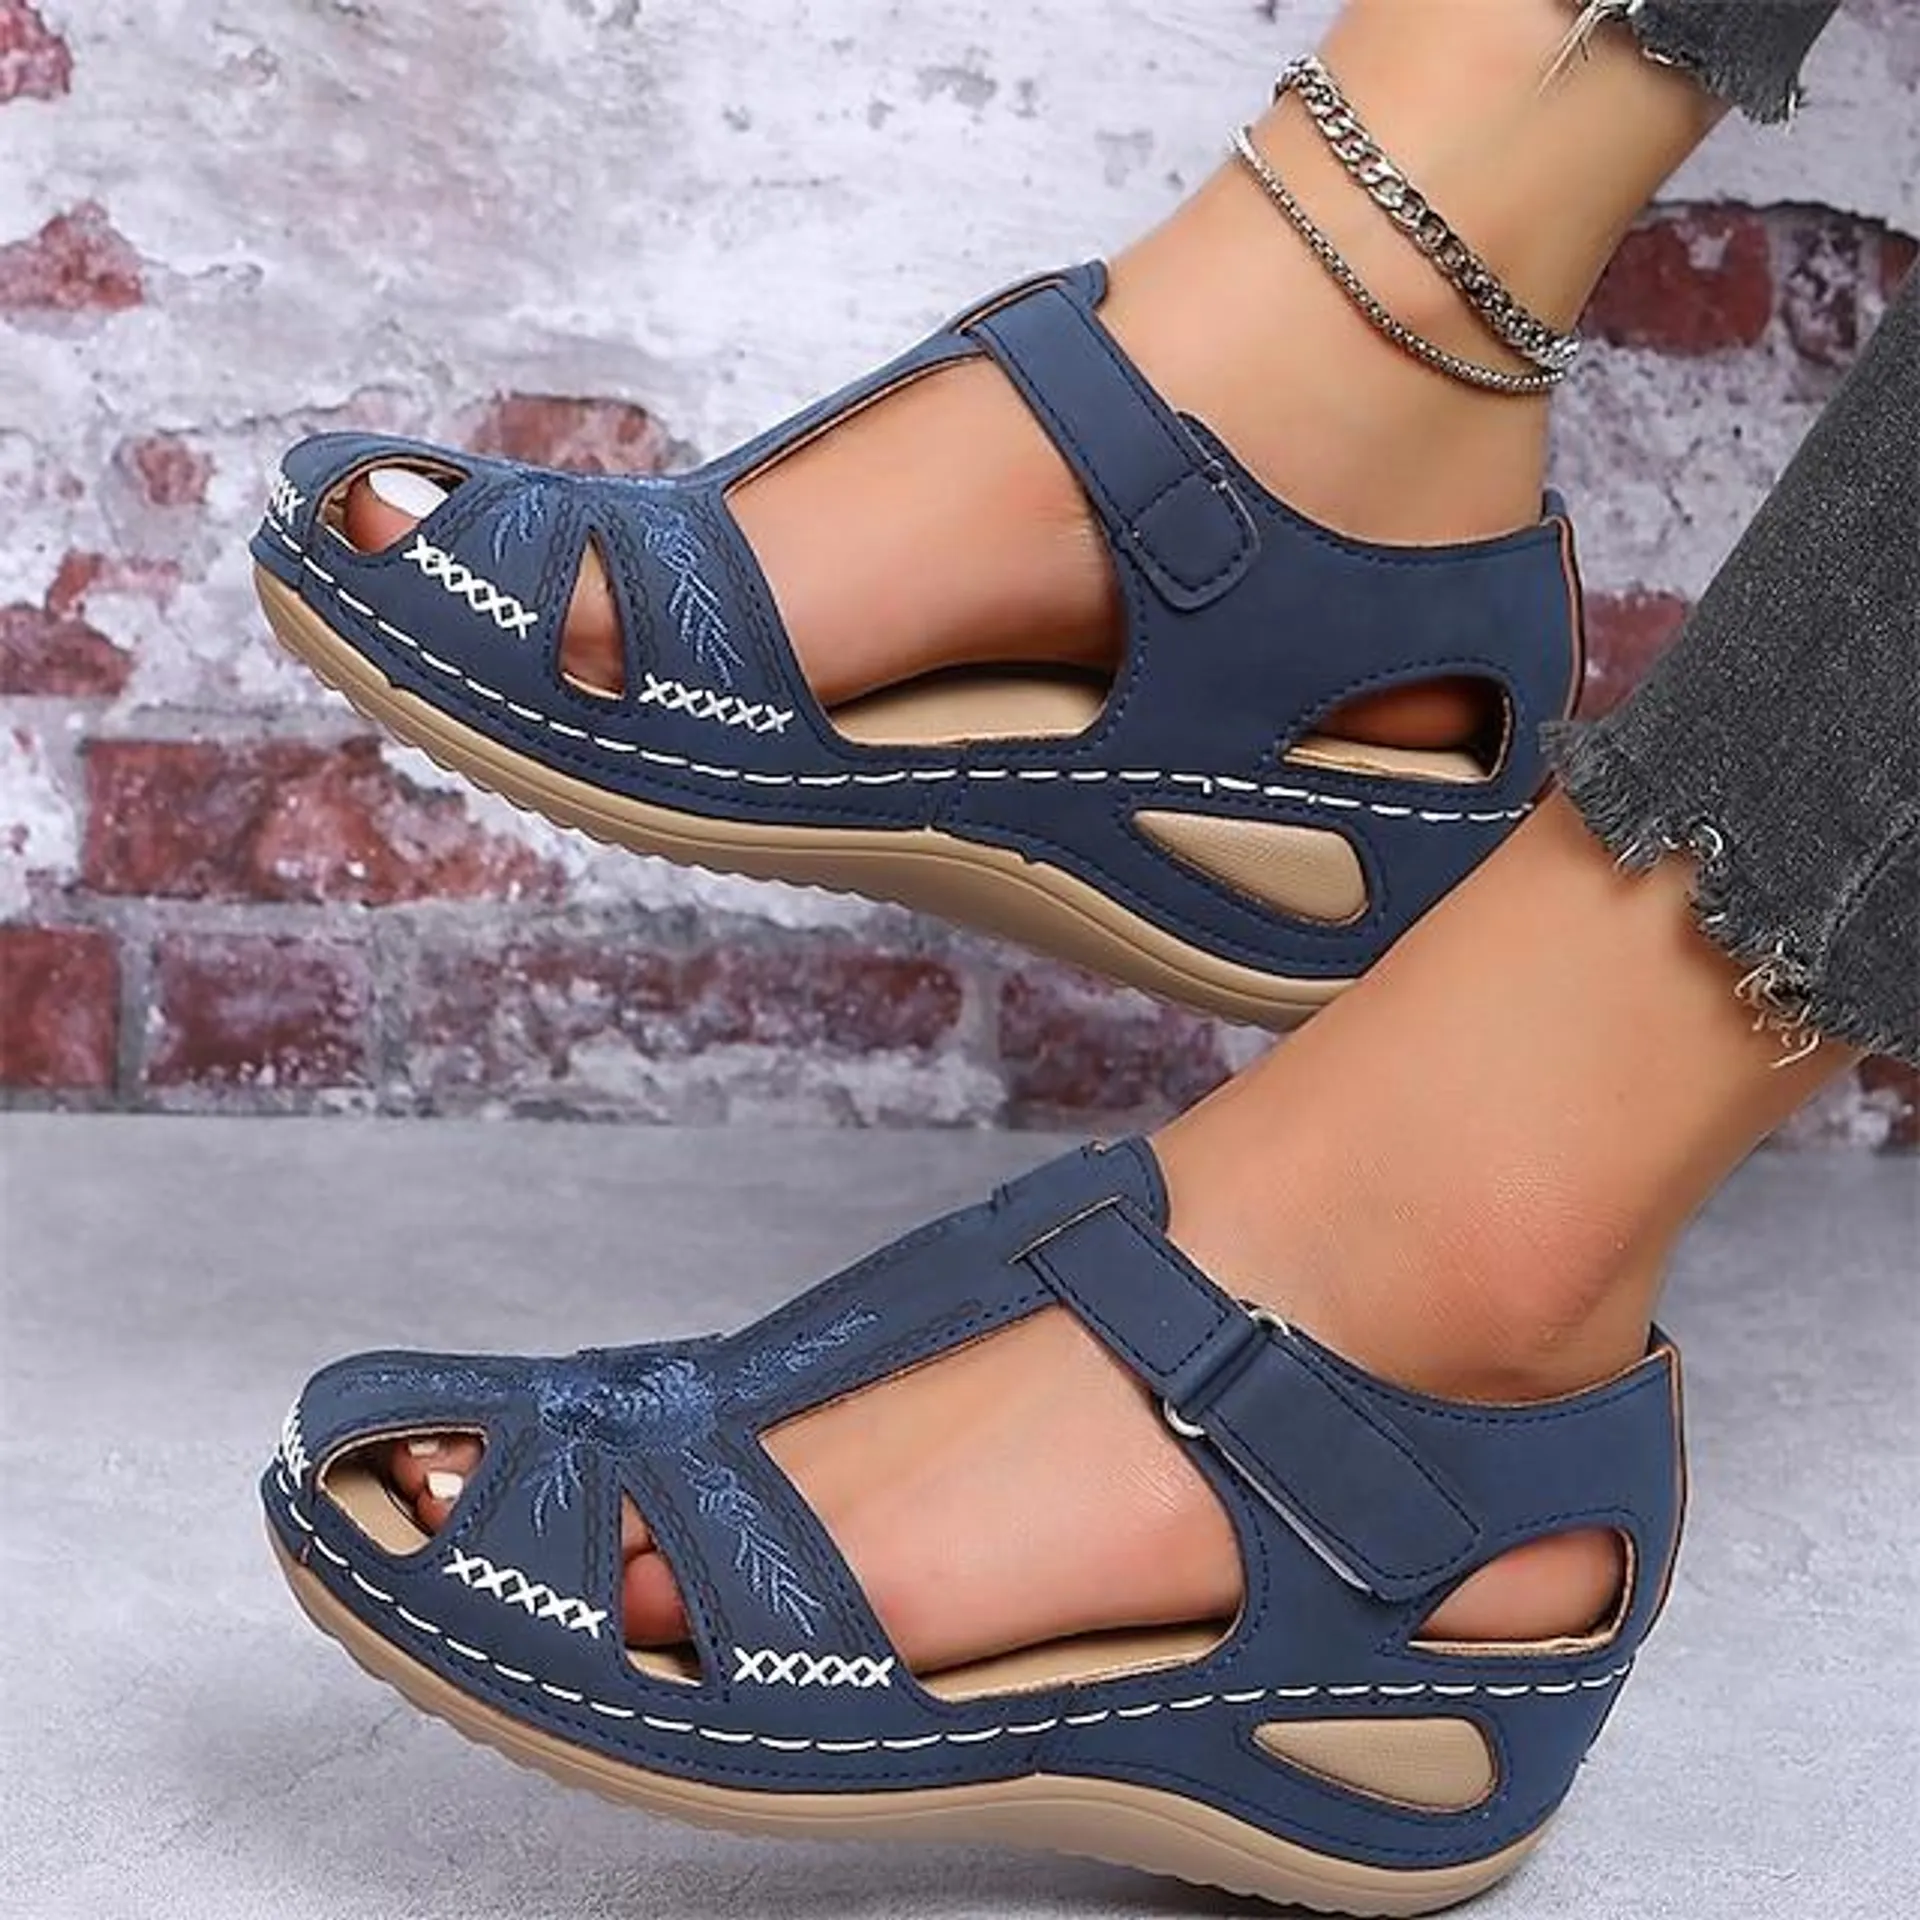 Women's Sandals Wedge Sandals Platform Sandals Outdoor Daily Beach Summer Embroidery Wedge Heel Round Toe Elegant Casual Minimalism Faux Leather Magic Tape Solid Color Blue